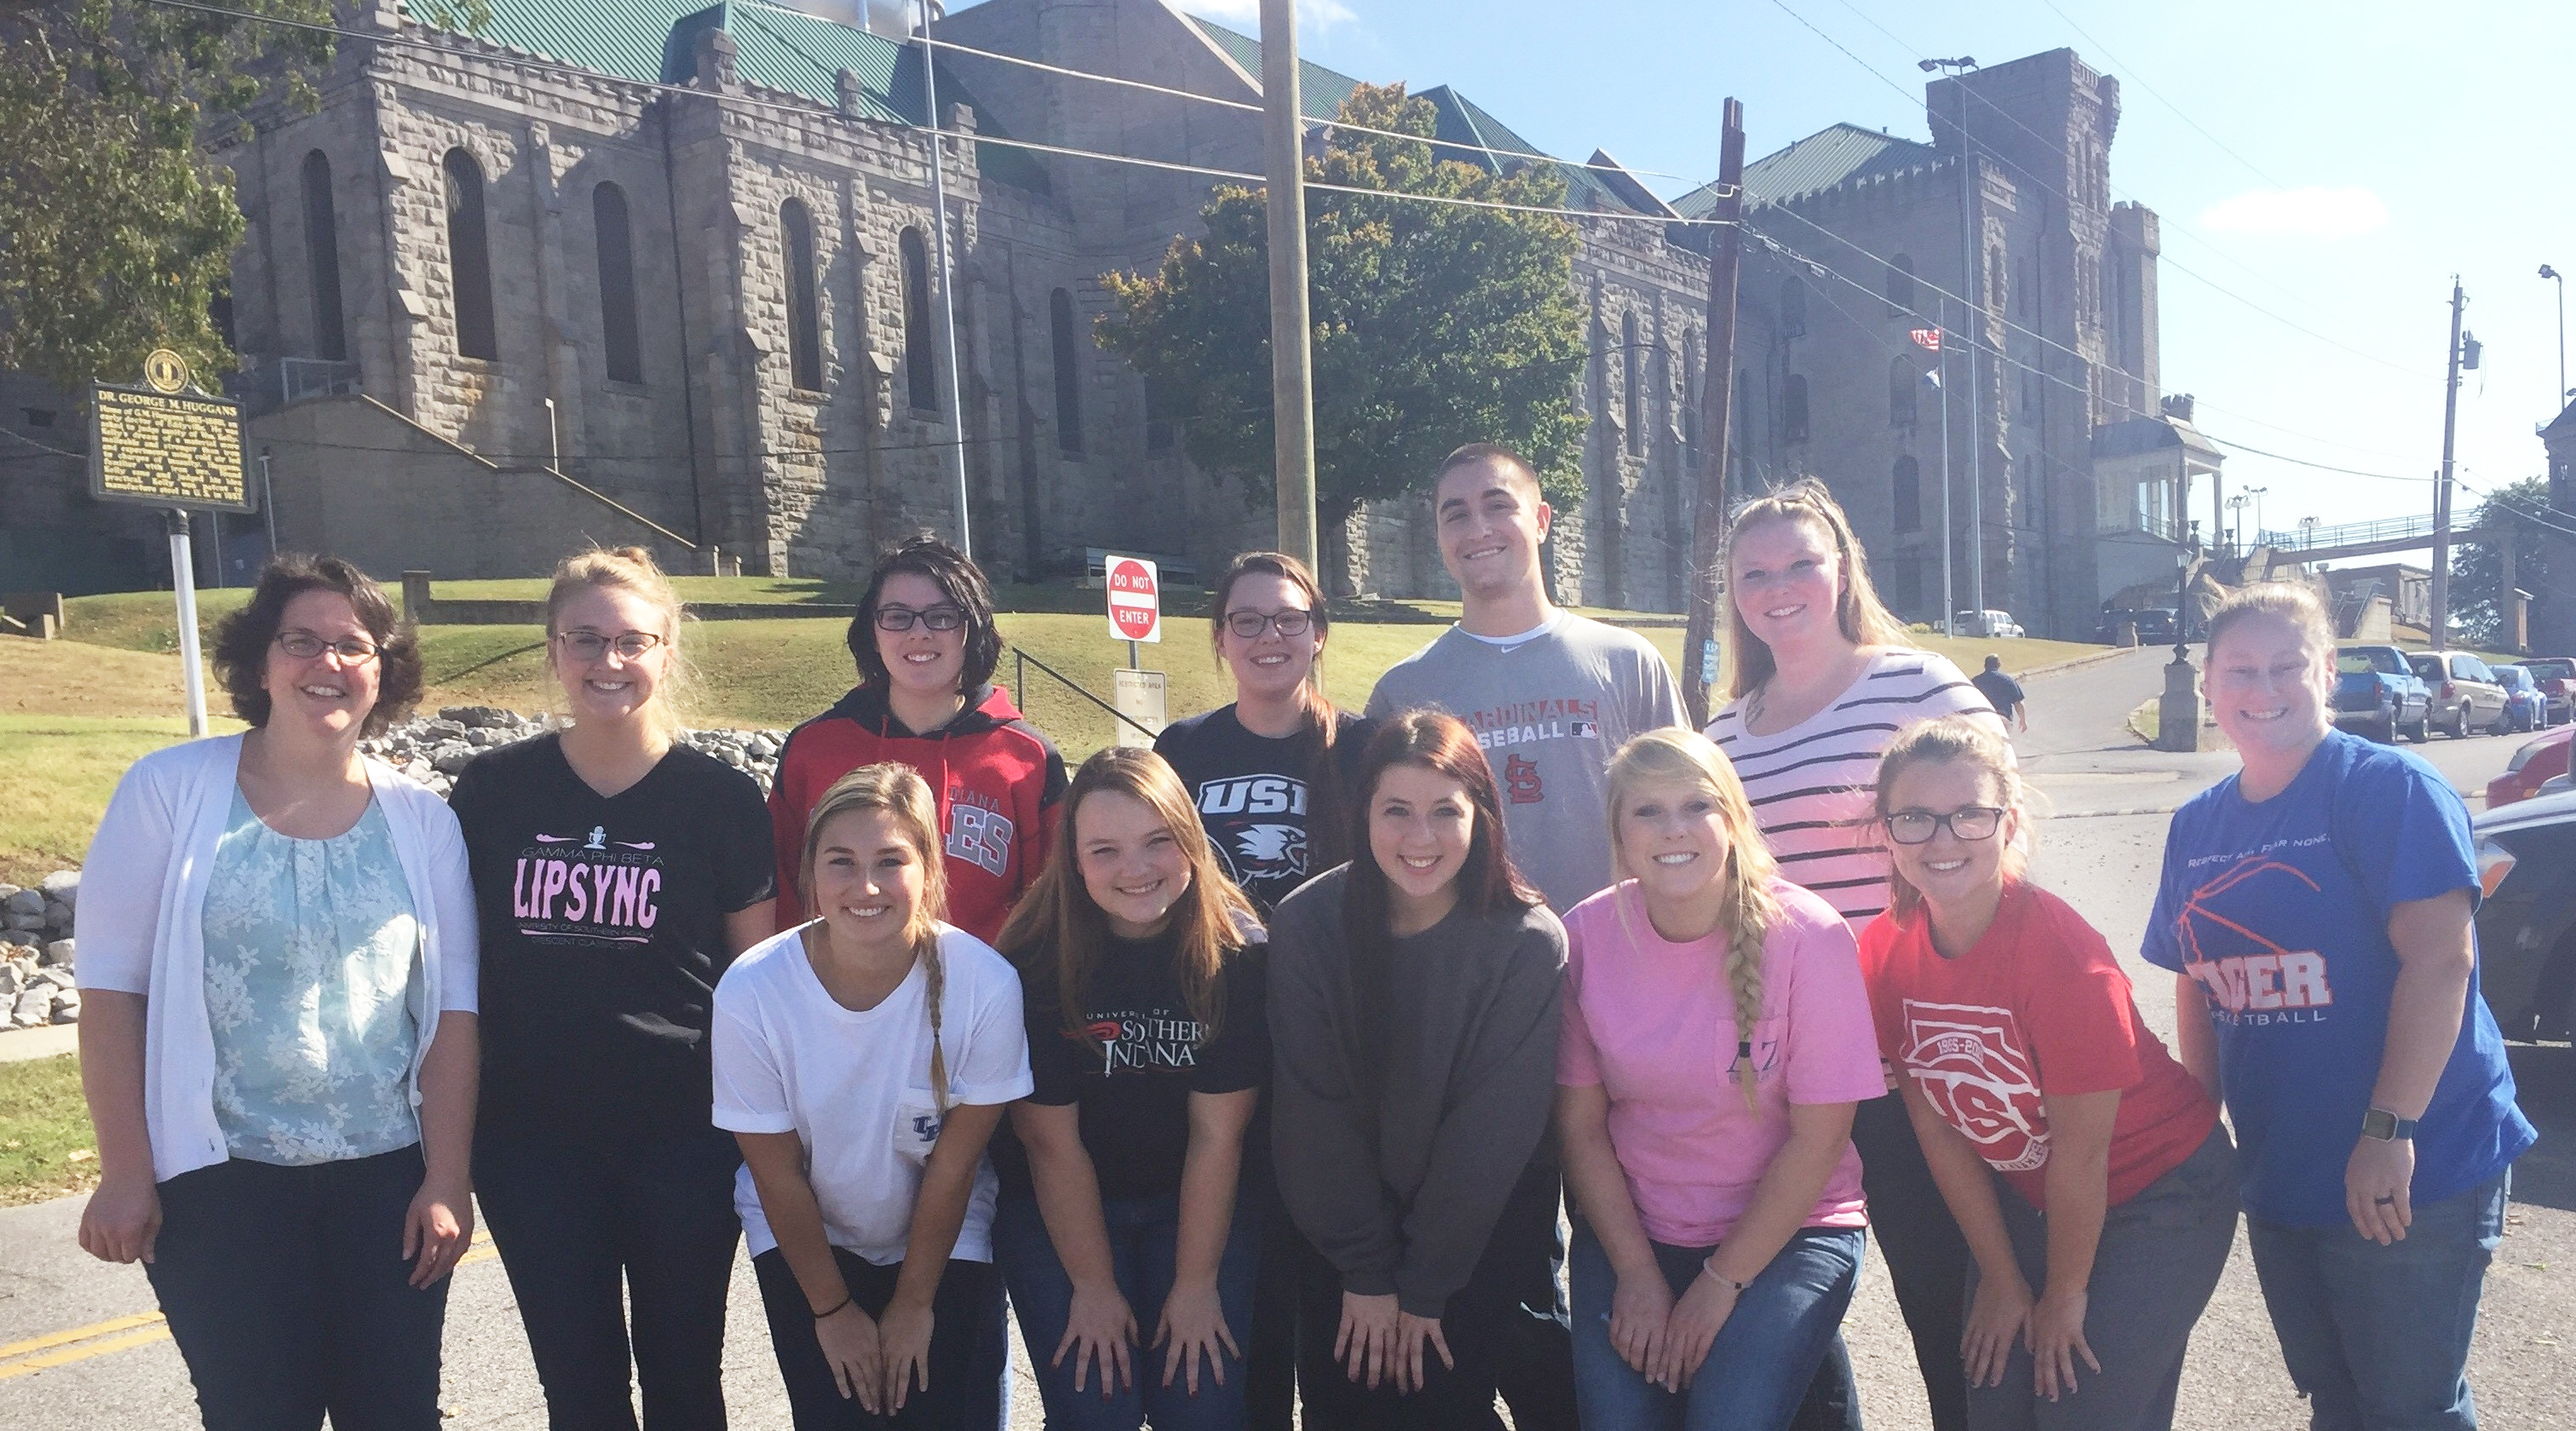 Dr. Melissa Stacer and her students outside of a prison